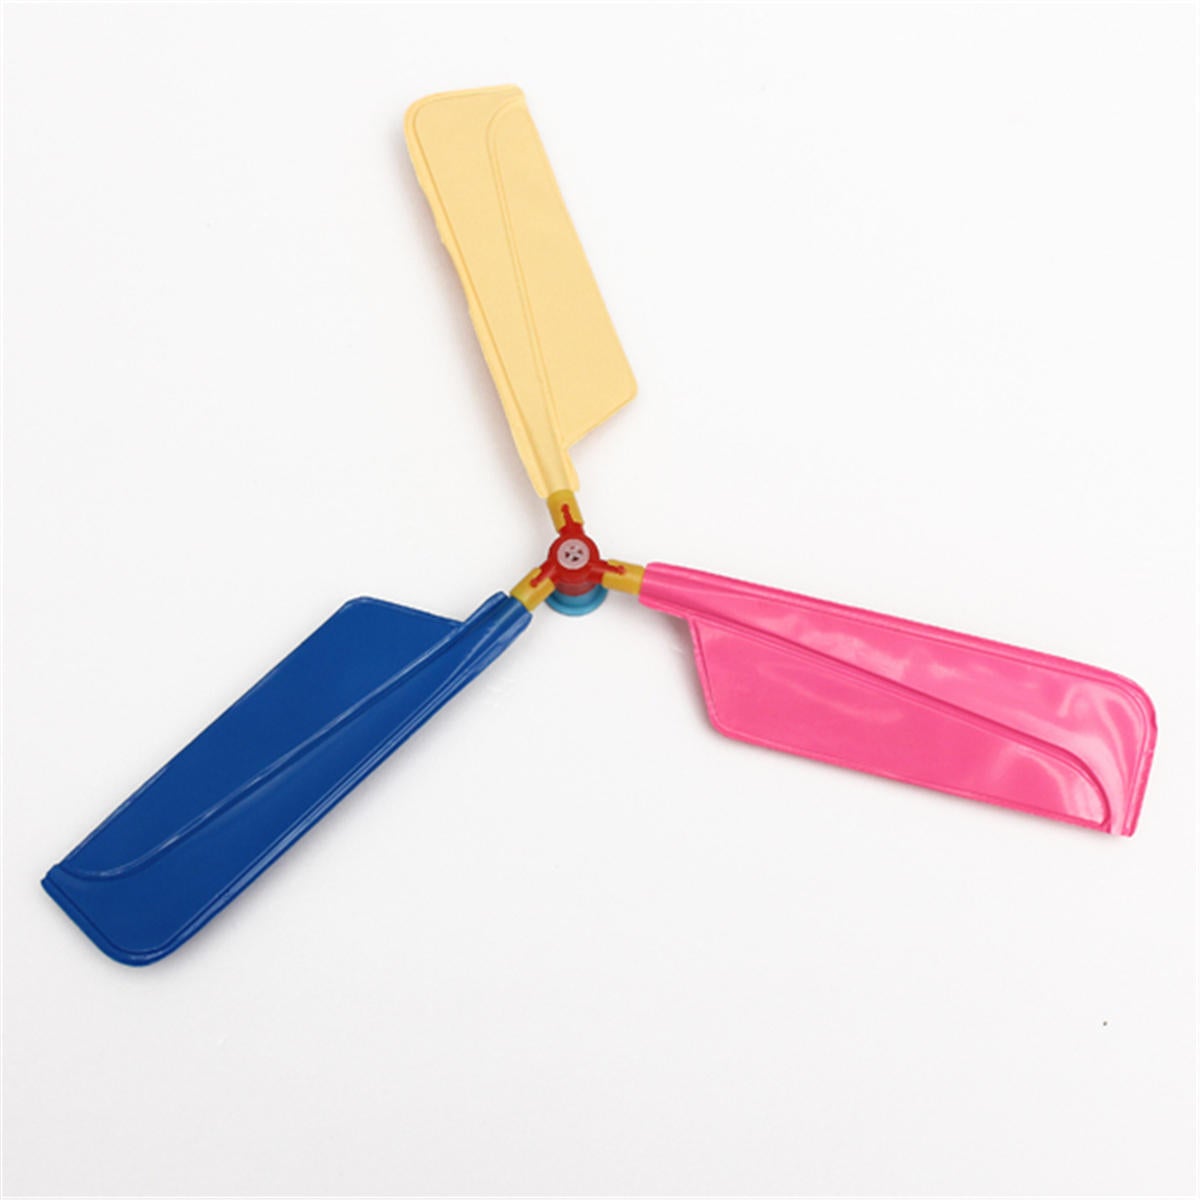 5PCs Colorful Traditional Classic Balloon Helicopter Portable Flying Toy